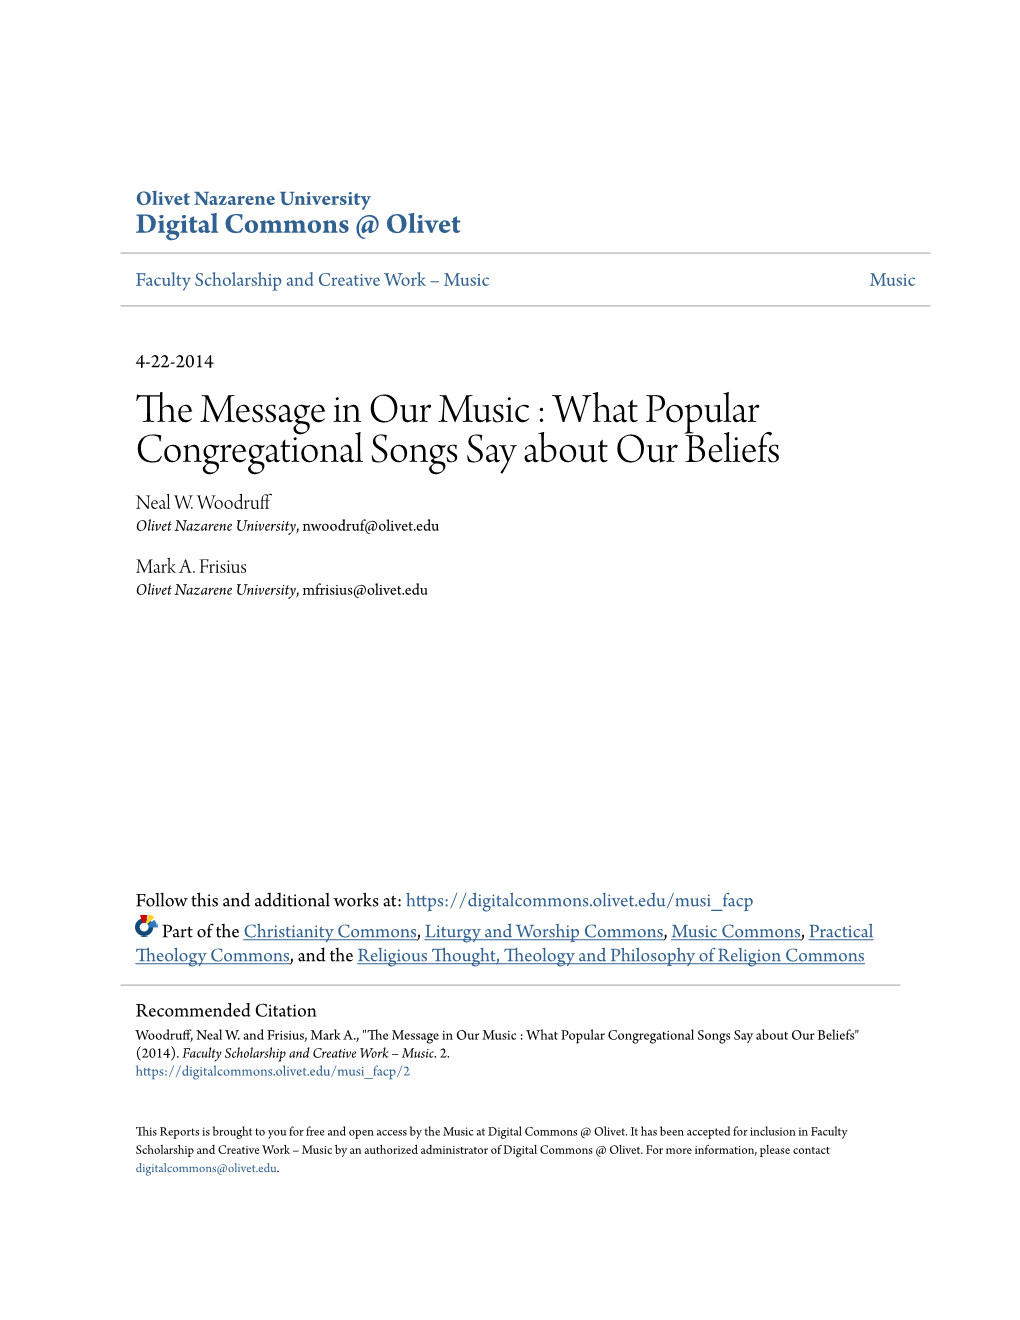 What Popular Congregational Songs Say About Our Beliefs Neal W